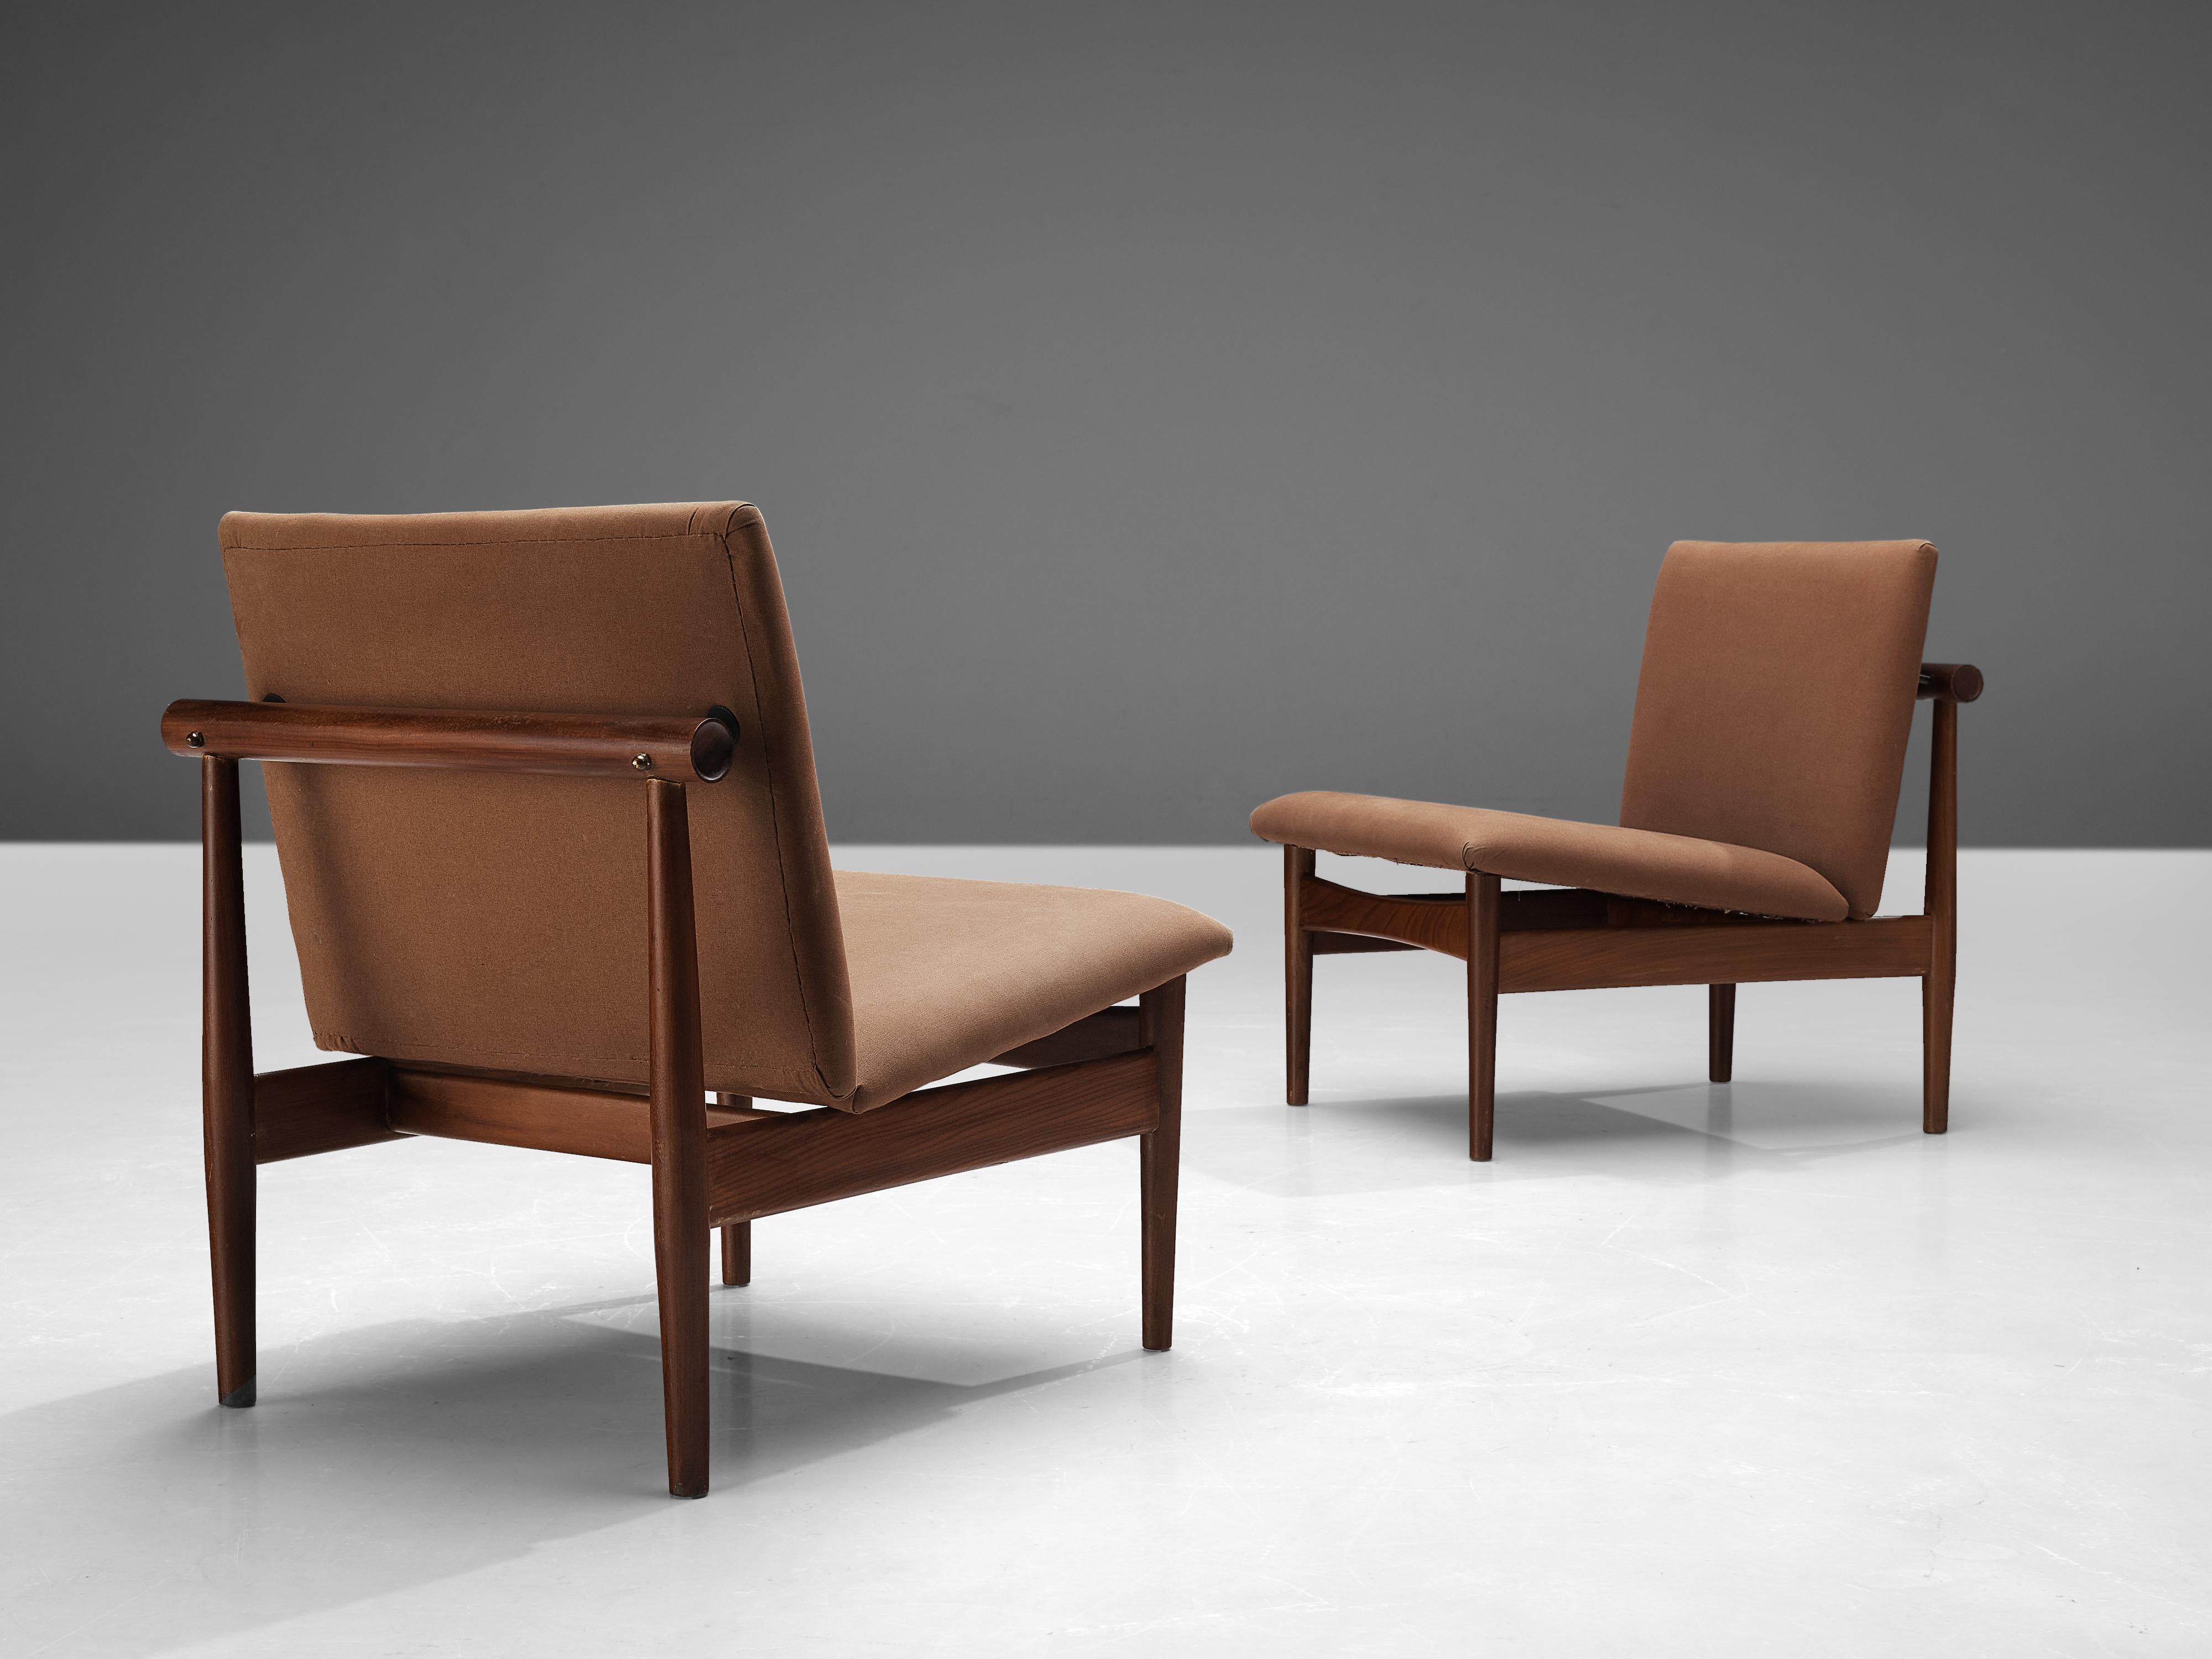 Finn Juhl for France & Søn, lounge chairs, 'model 137', teak, brass, upholstery, Denmark, designed in 1957

This pair of lounge chairs from the ‘Japan’ series that Finn Juhl designed for France & Søn exemplifies Juhl’s idea to detach carrying from